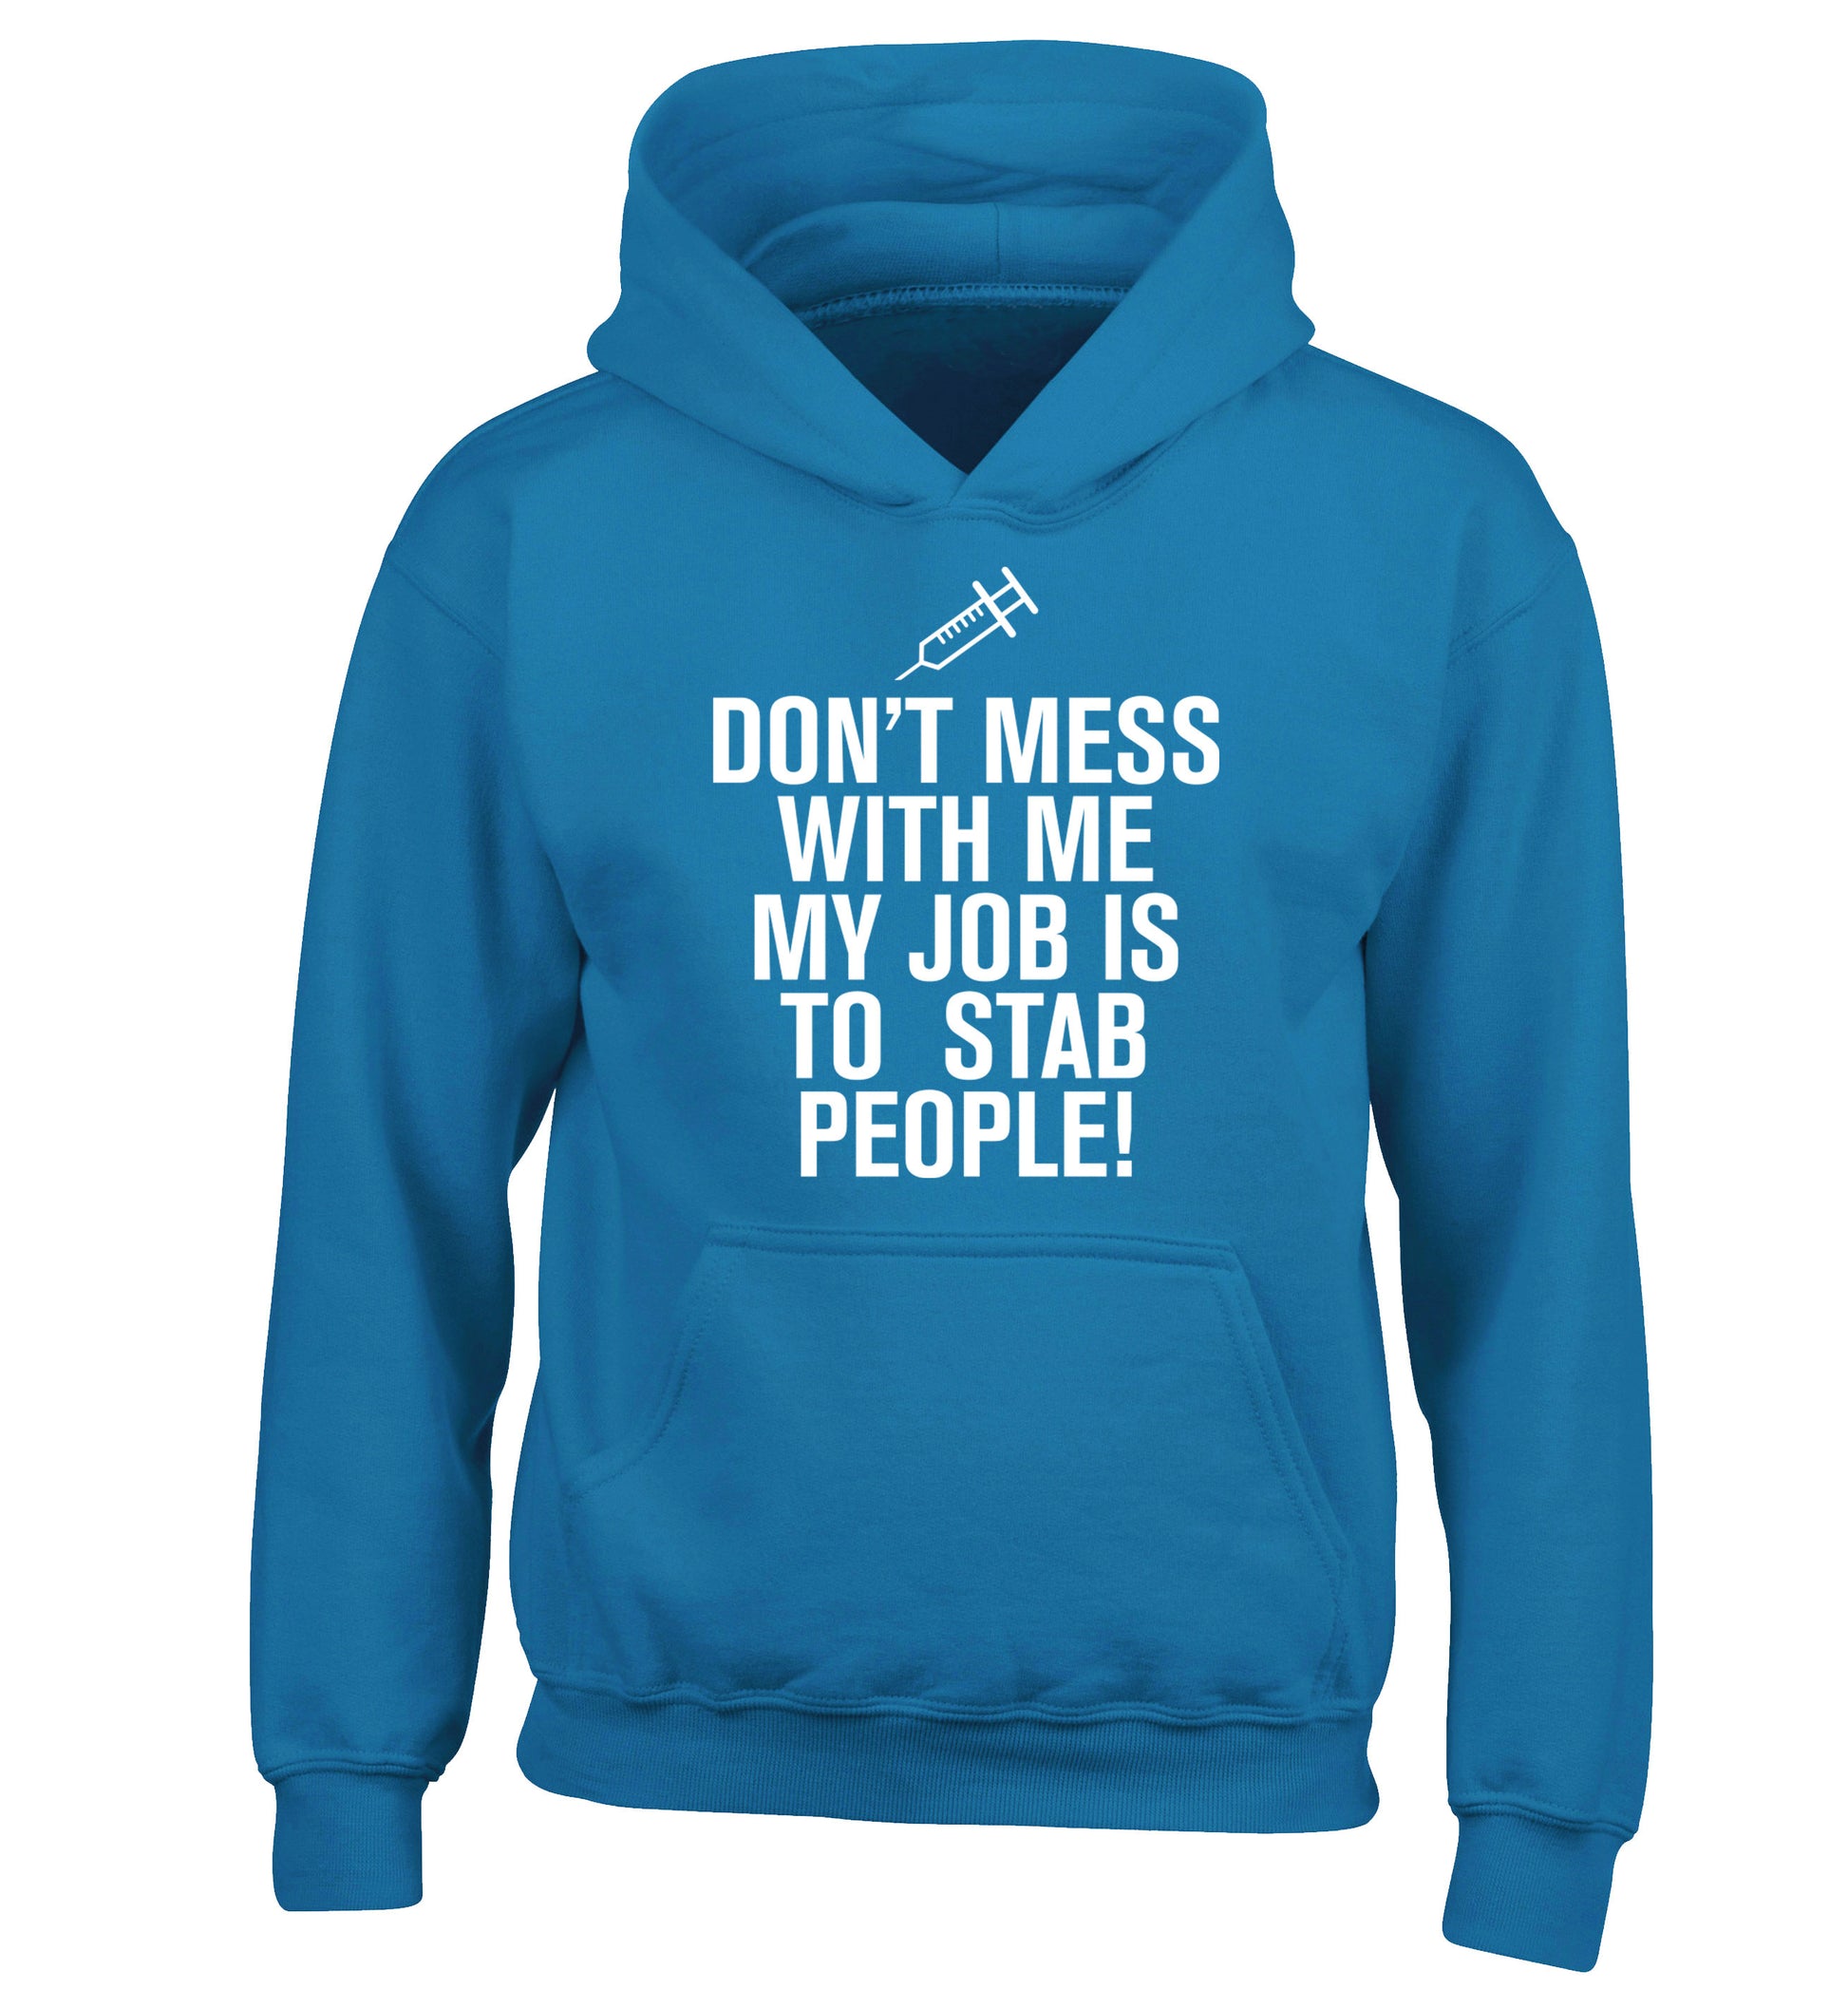 Don't mess with me my job is to stab people! children's blue hoodie 12-14 Years